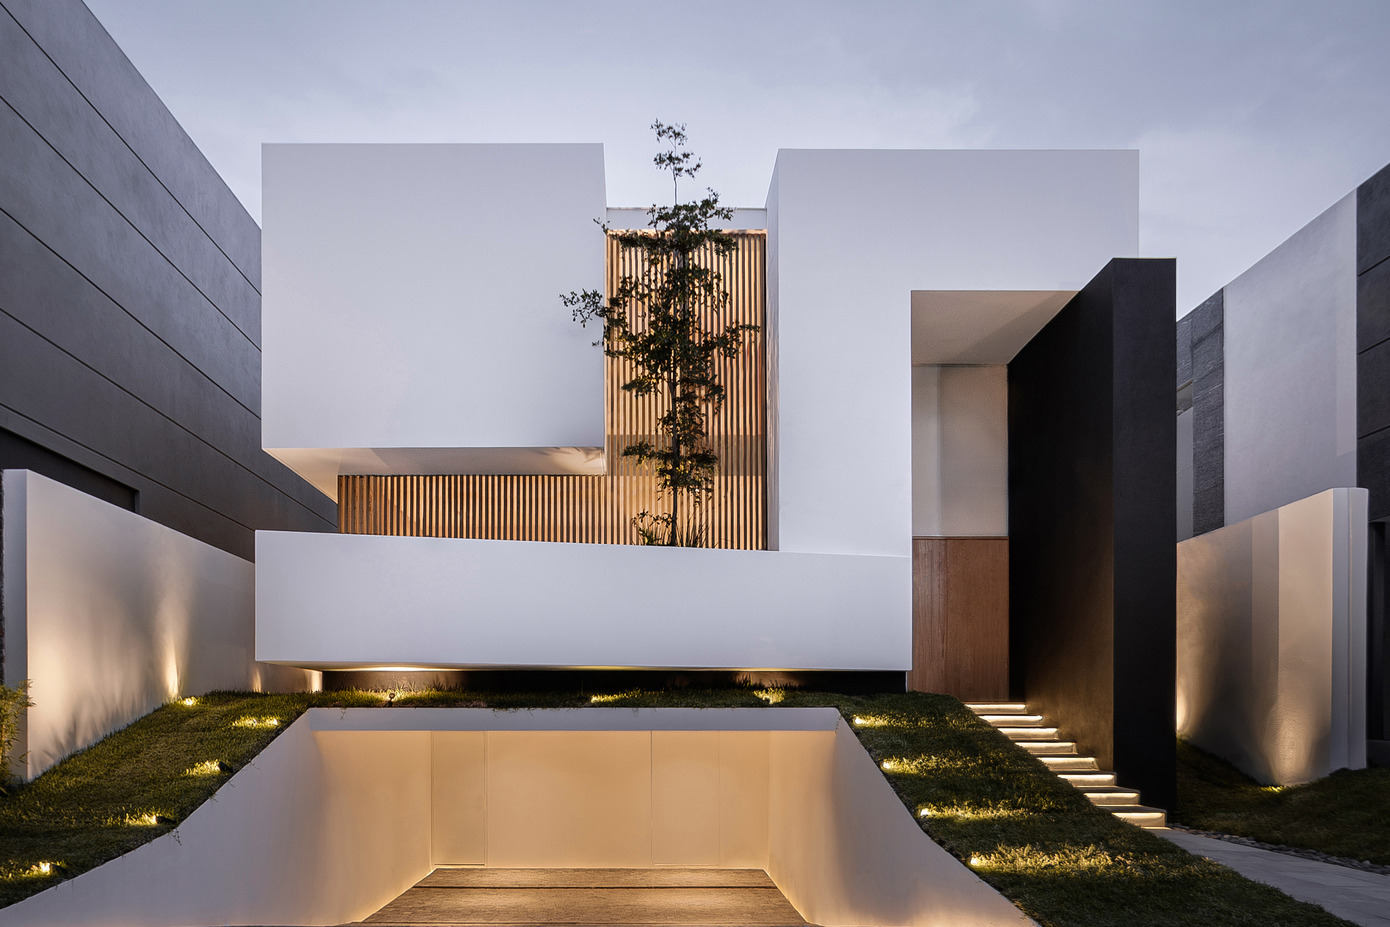 178 House: Mexico’s Modern Family Oasis